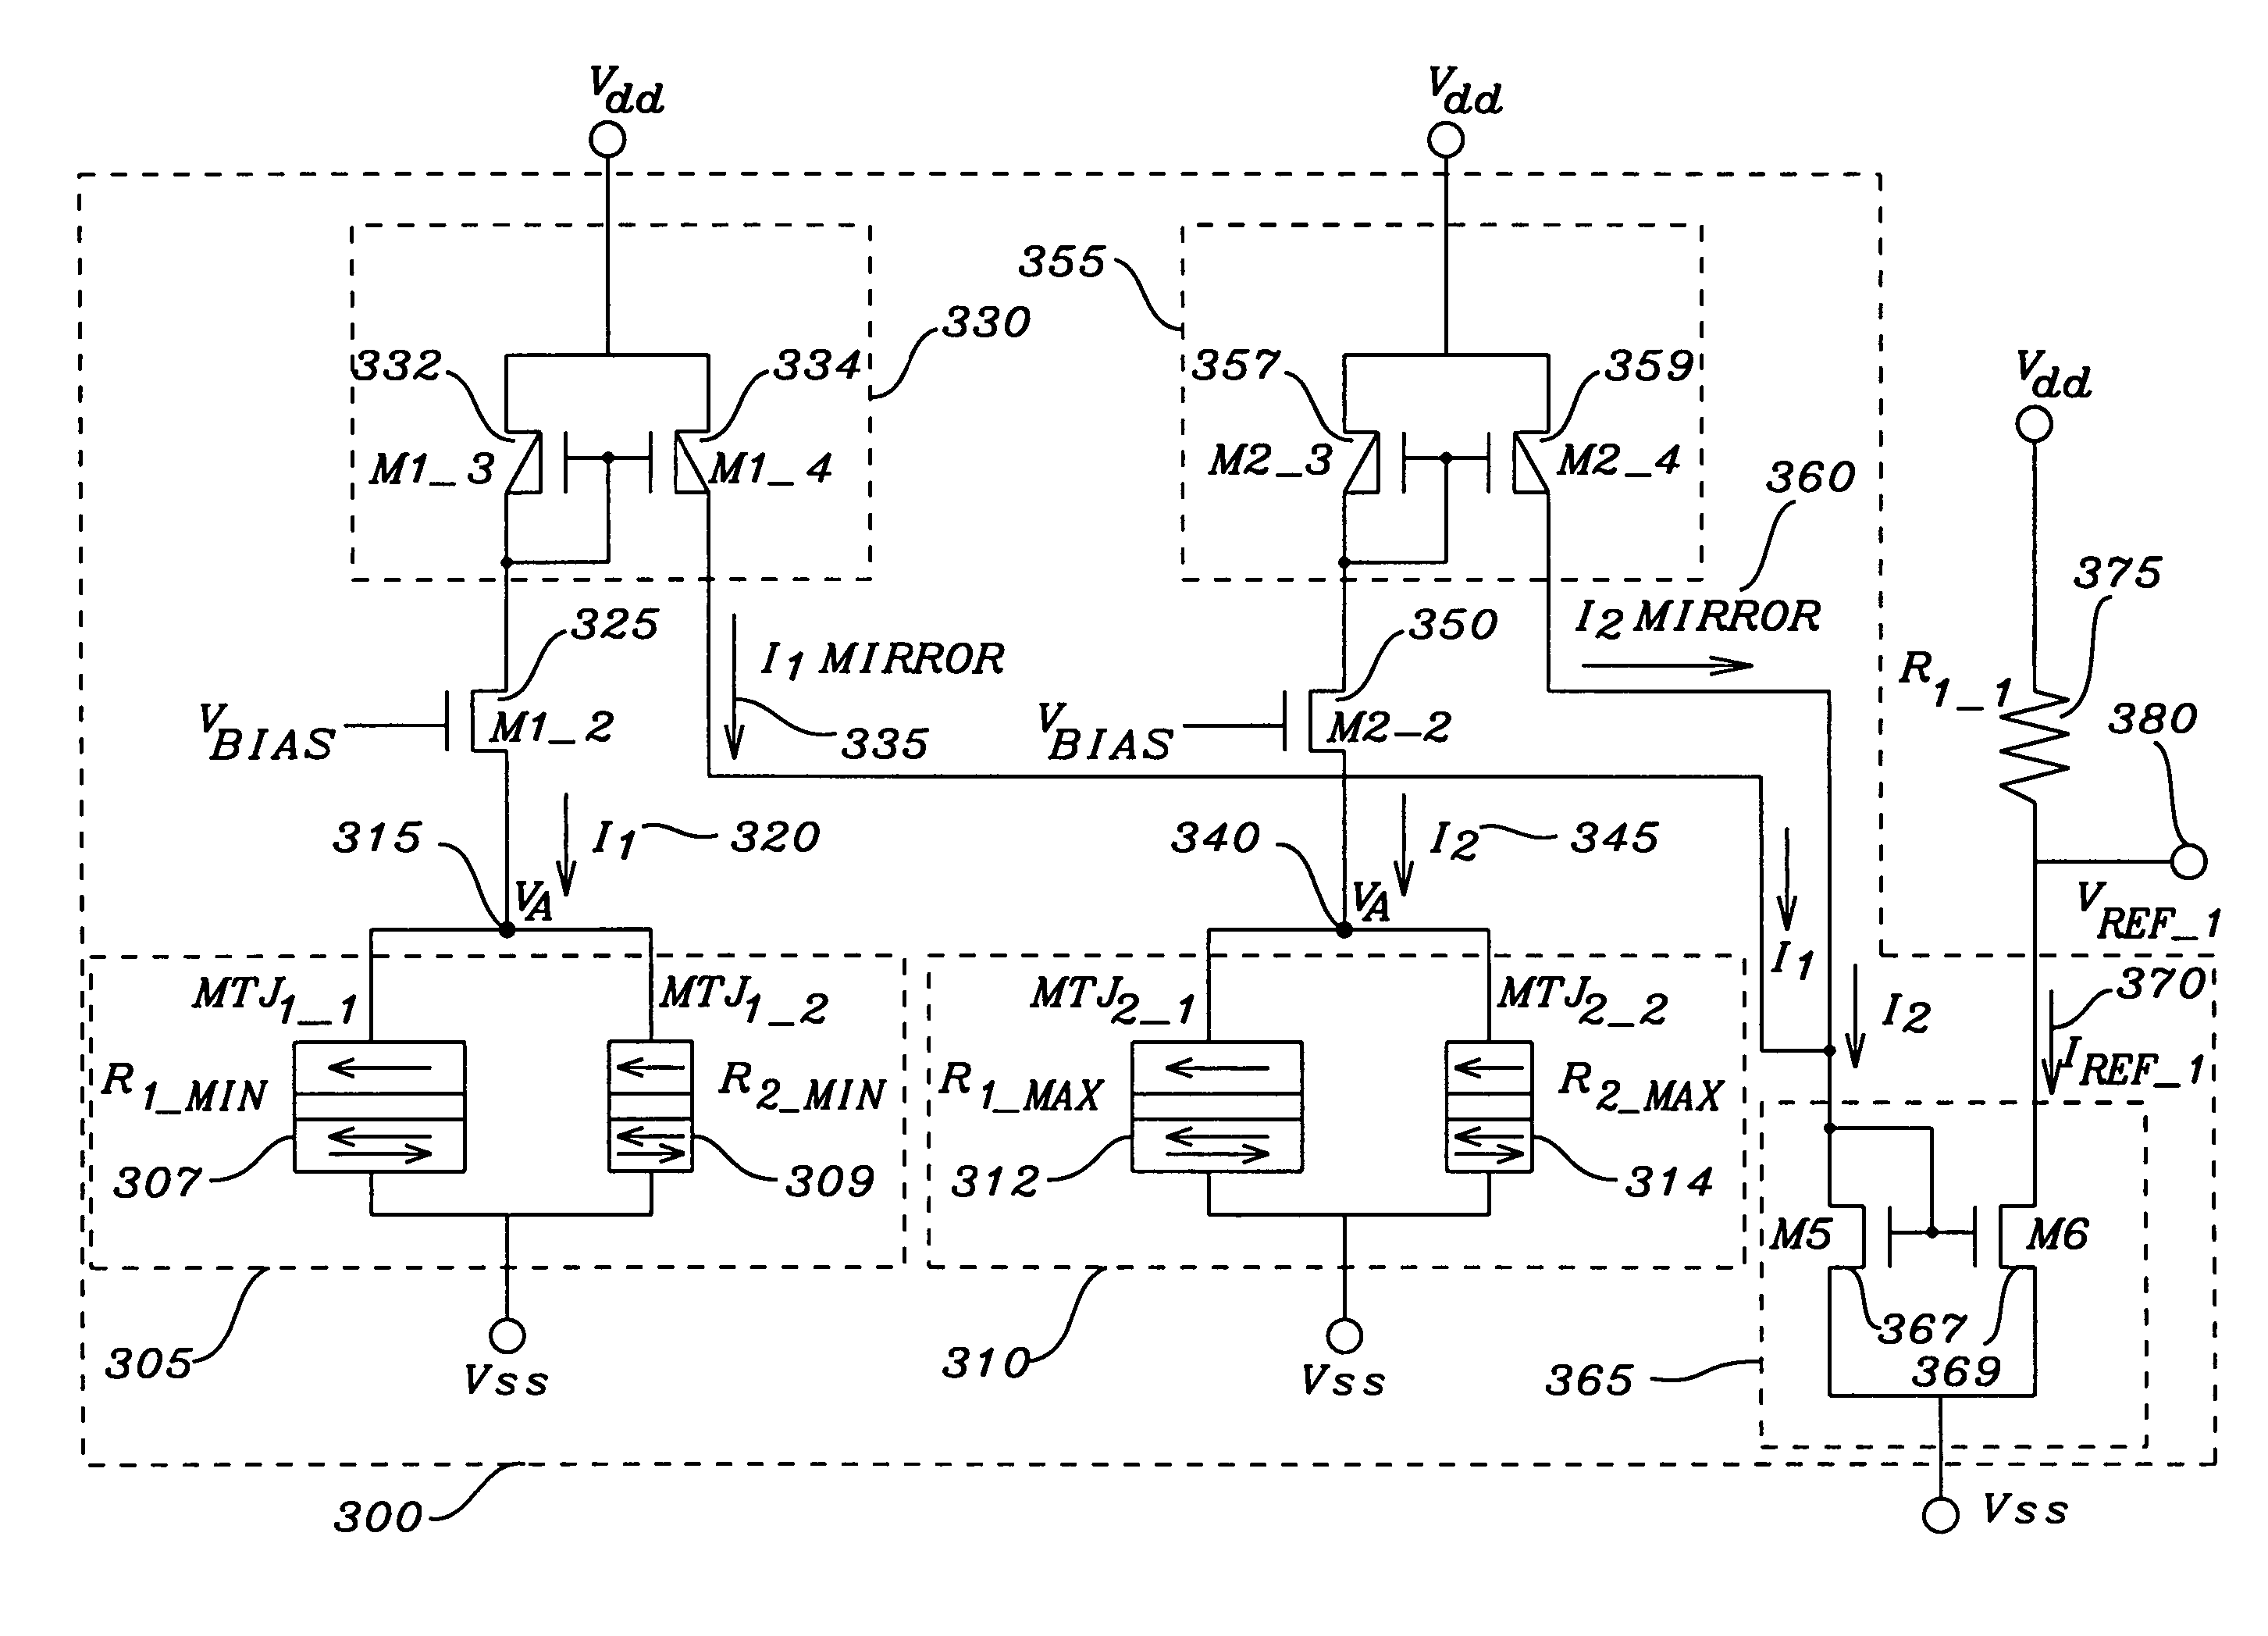 Reference generator for multilevel nonlinear resistivity memory storage elements